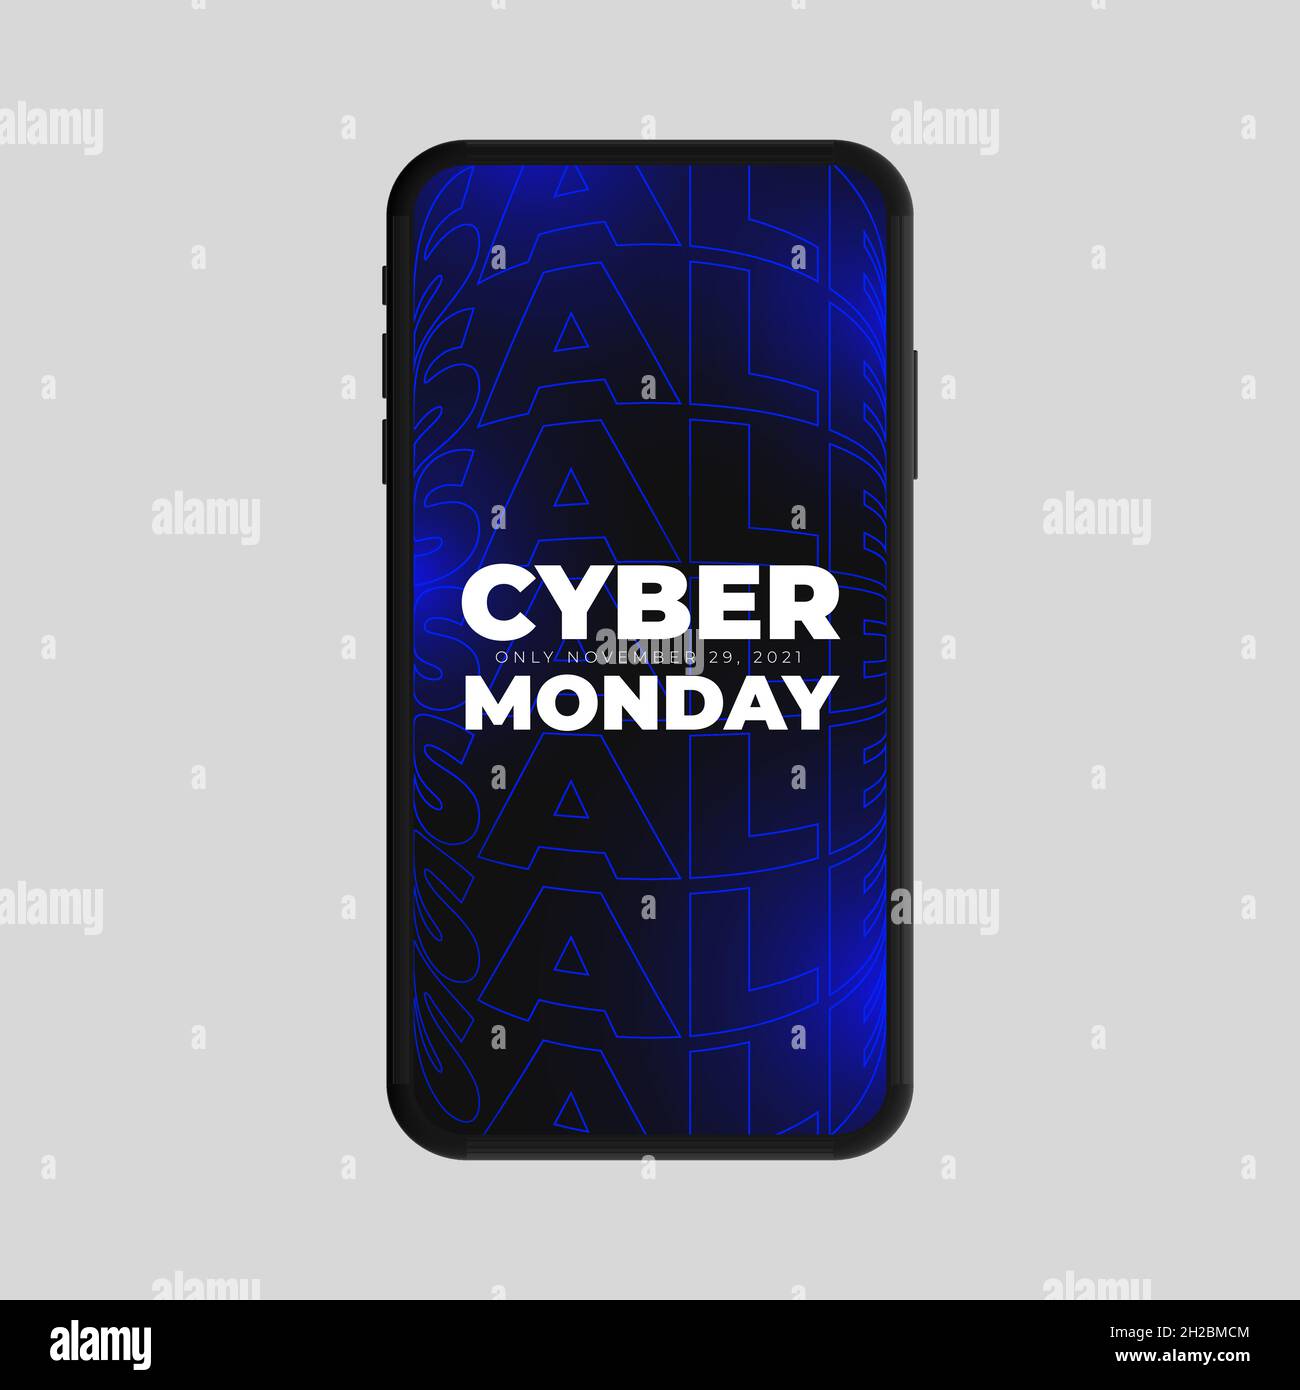 Cyber Monday only November sale story. Vector illustration Stock Vector